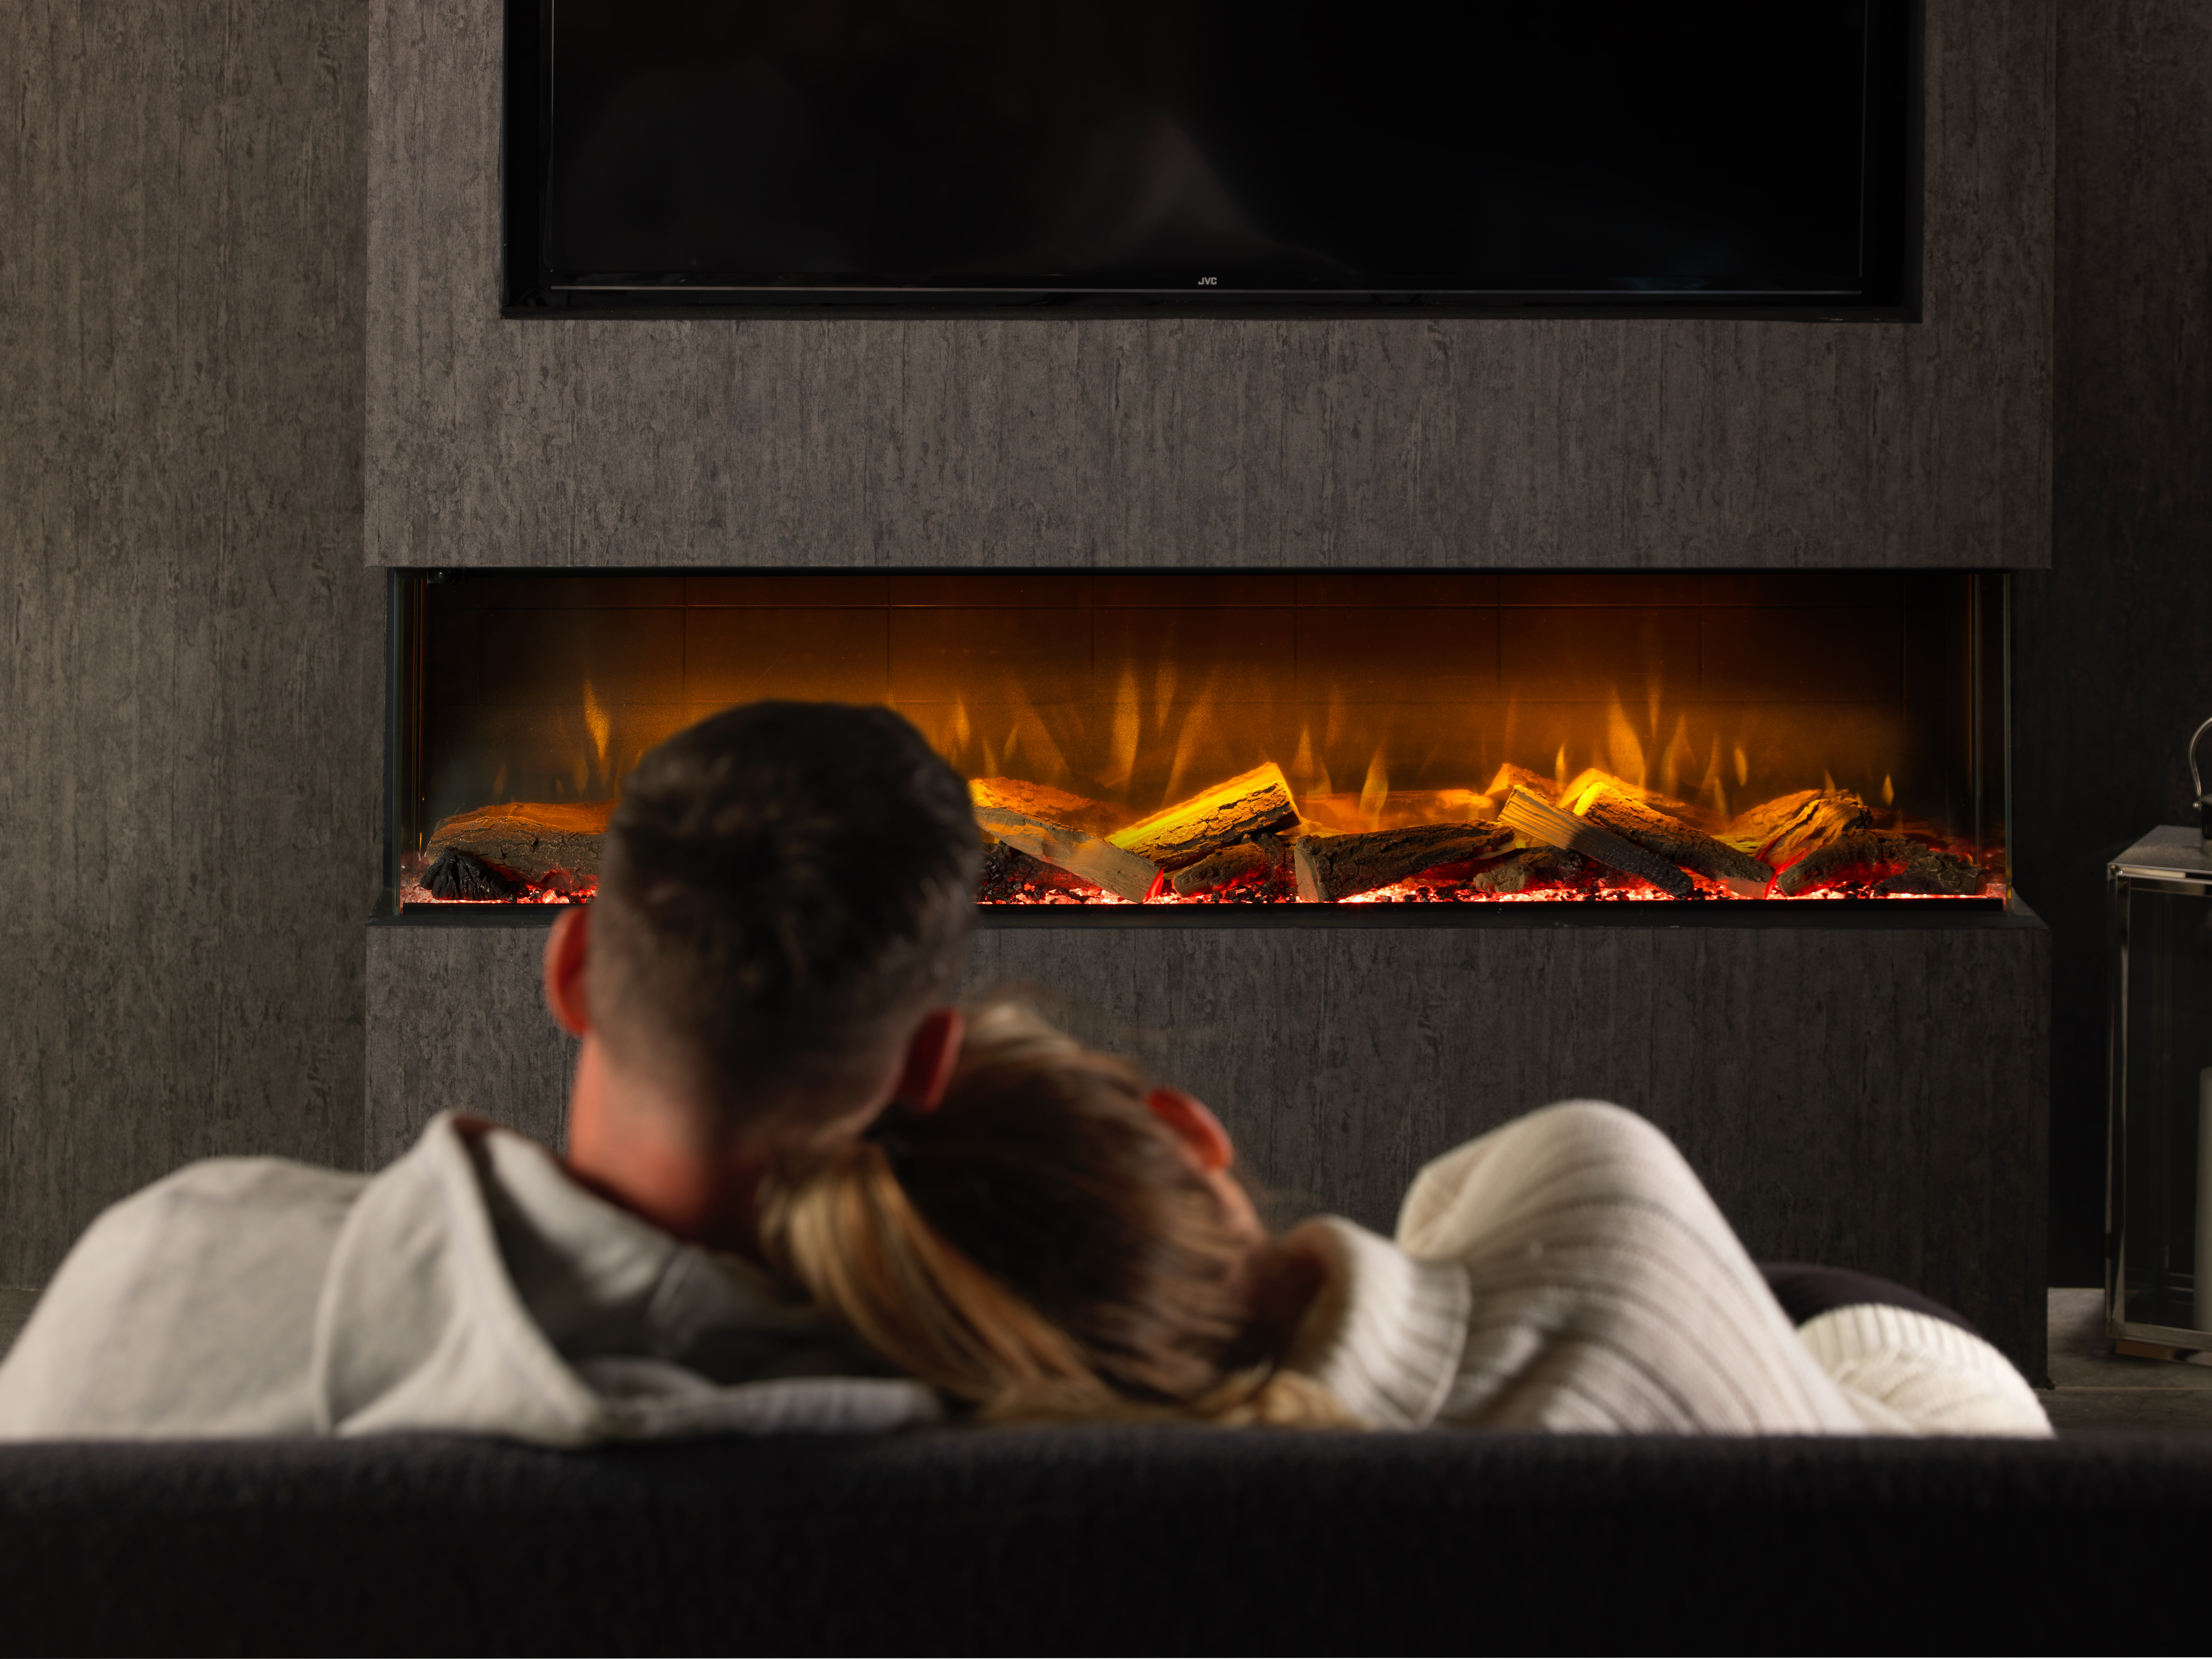 Why should I buy an electric fireplace?